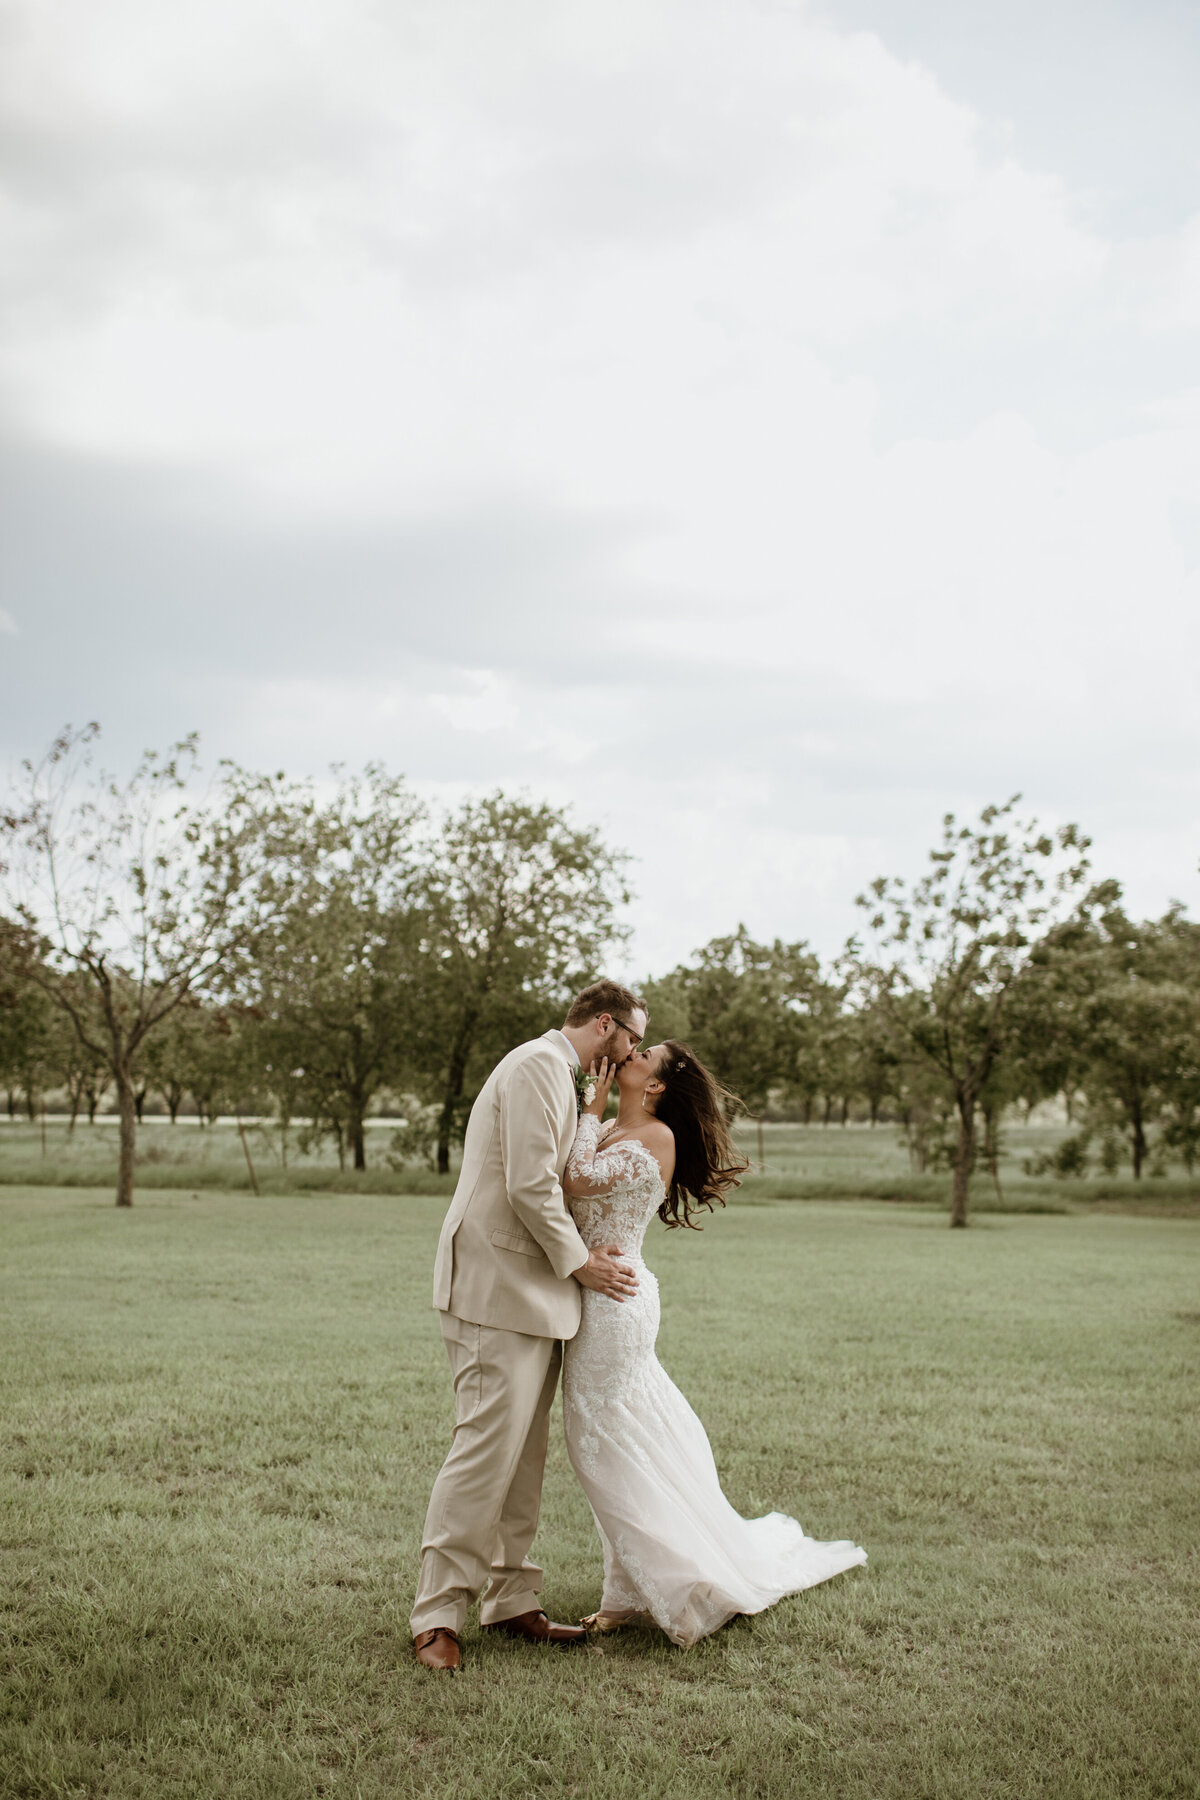 A romantic kiss shared between a bride and groom at Pecan Creek Farm in Venus Texas. Captured by Fort Worth Wedding Photographer, Megan Christine Studio